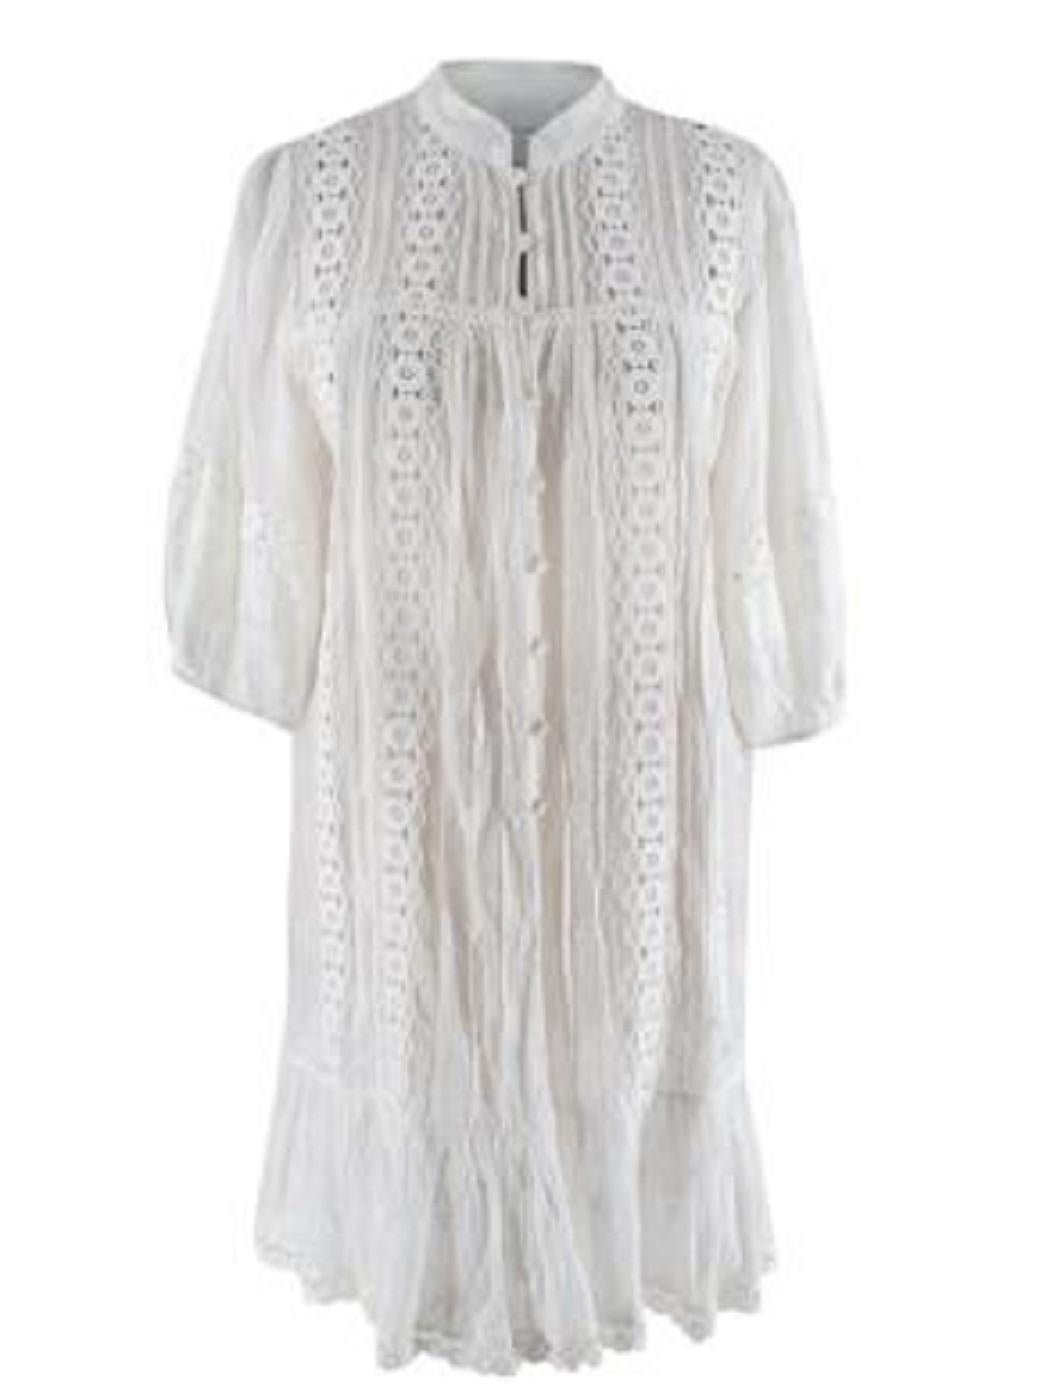 Zimmermann White Lace & Cotton Voile Short Dress

- Long-sleeved button-up cotton and lace dress 
- Floral embroidery 
- Elasticated cuffs 
- Floral lace trim at hem 
- Layer over trousers or leggings for a tunic-style look

Materials
100%